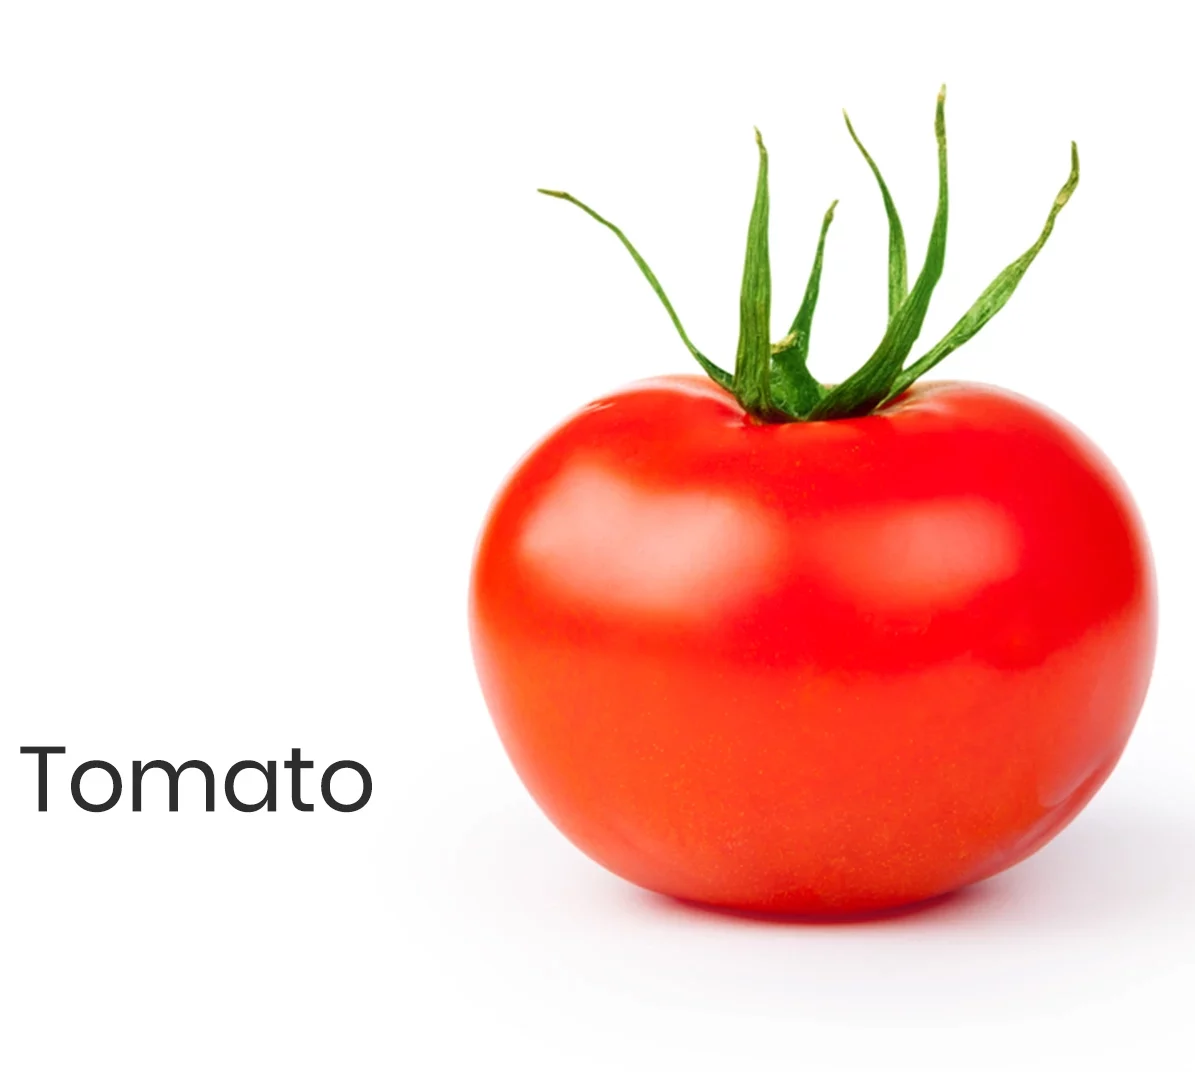 6 Best Ways You Can Use Tomato for Great Skin